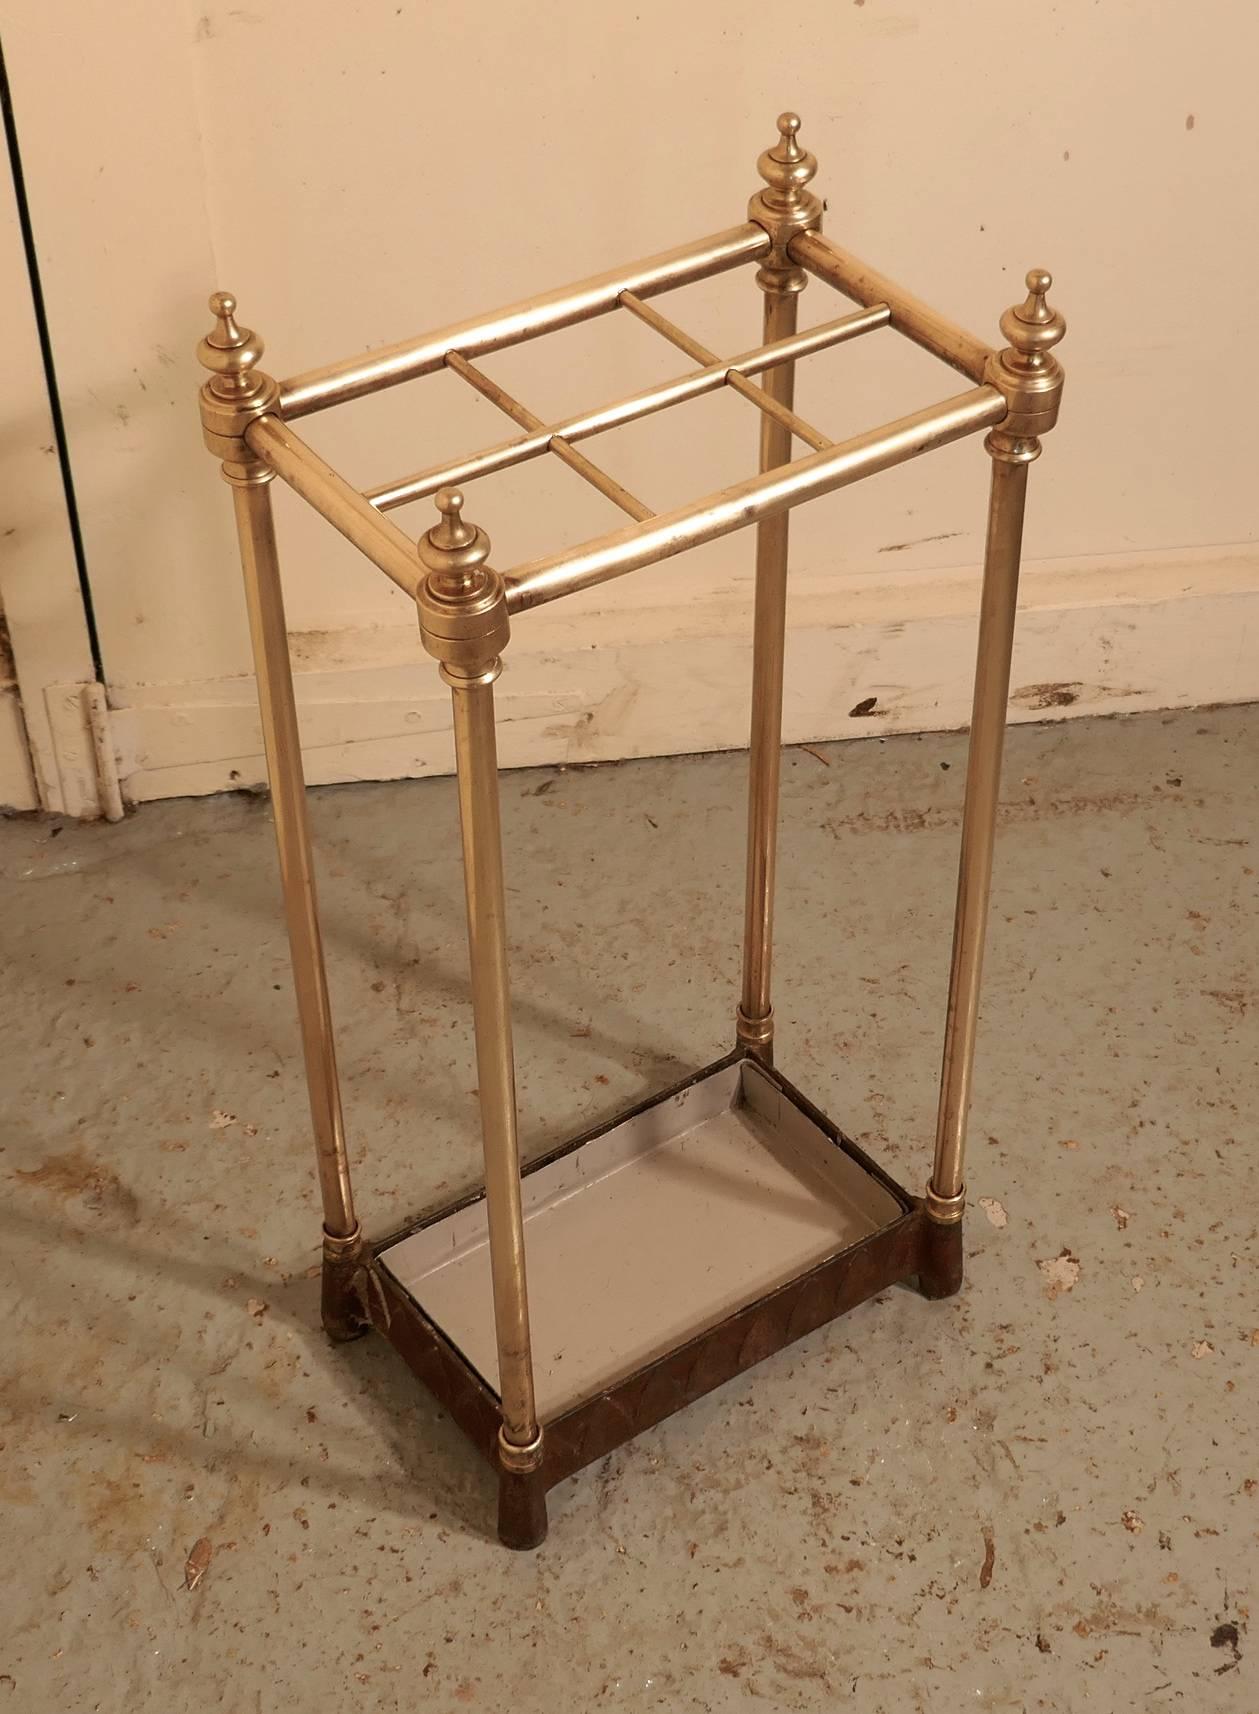 Victorian brass and cast iron walking stick stand or umbrella stand

A charming piece, the stand has a brass top divided into six sections to hold either Walking Sticks or Umbrellas, the heavy iron base holds the drip tray
The stand is 24” high,